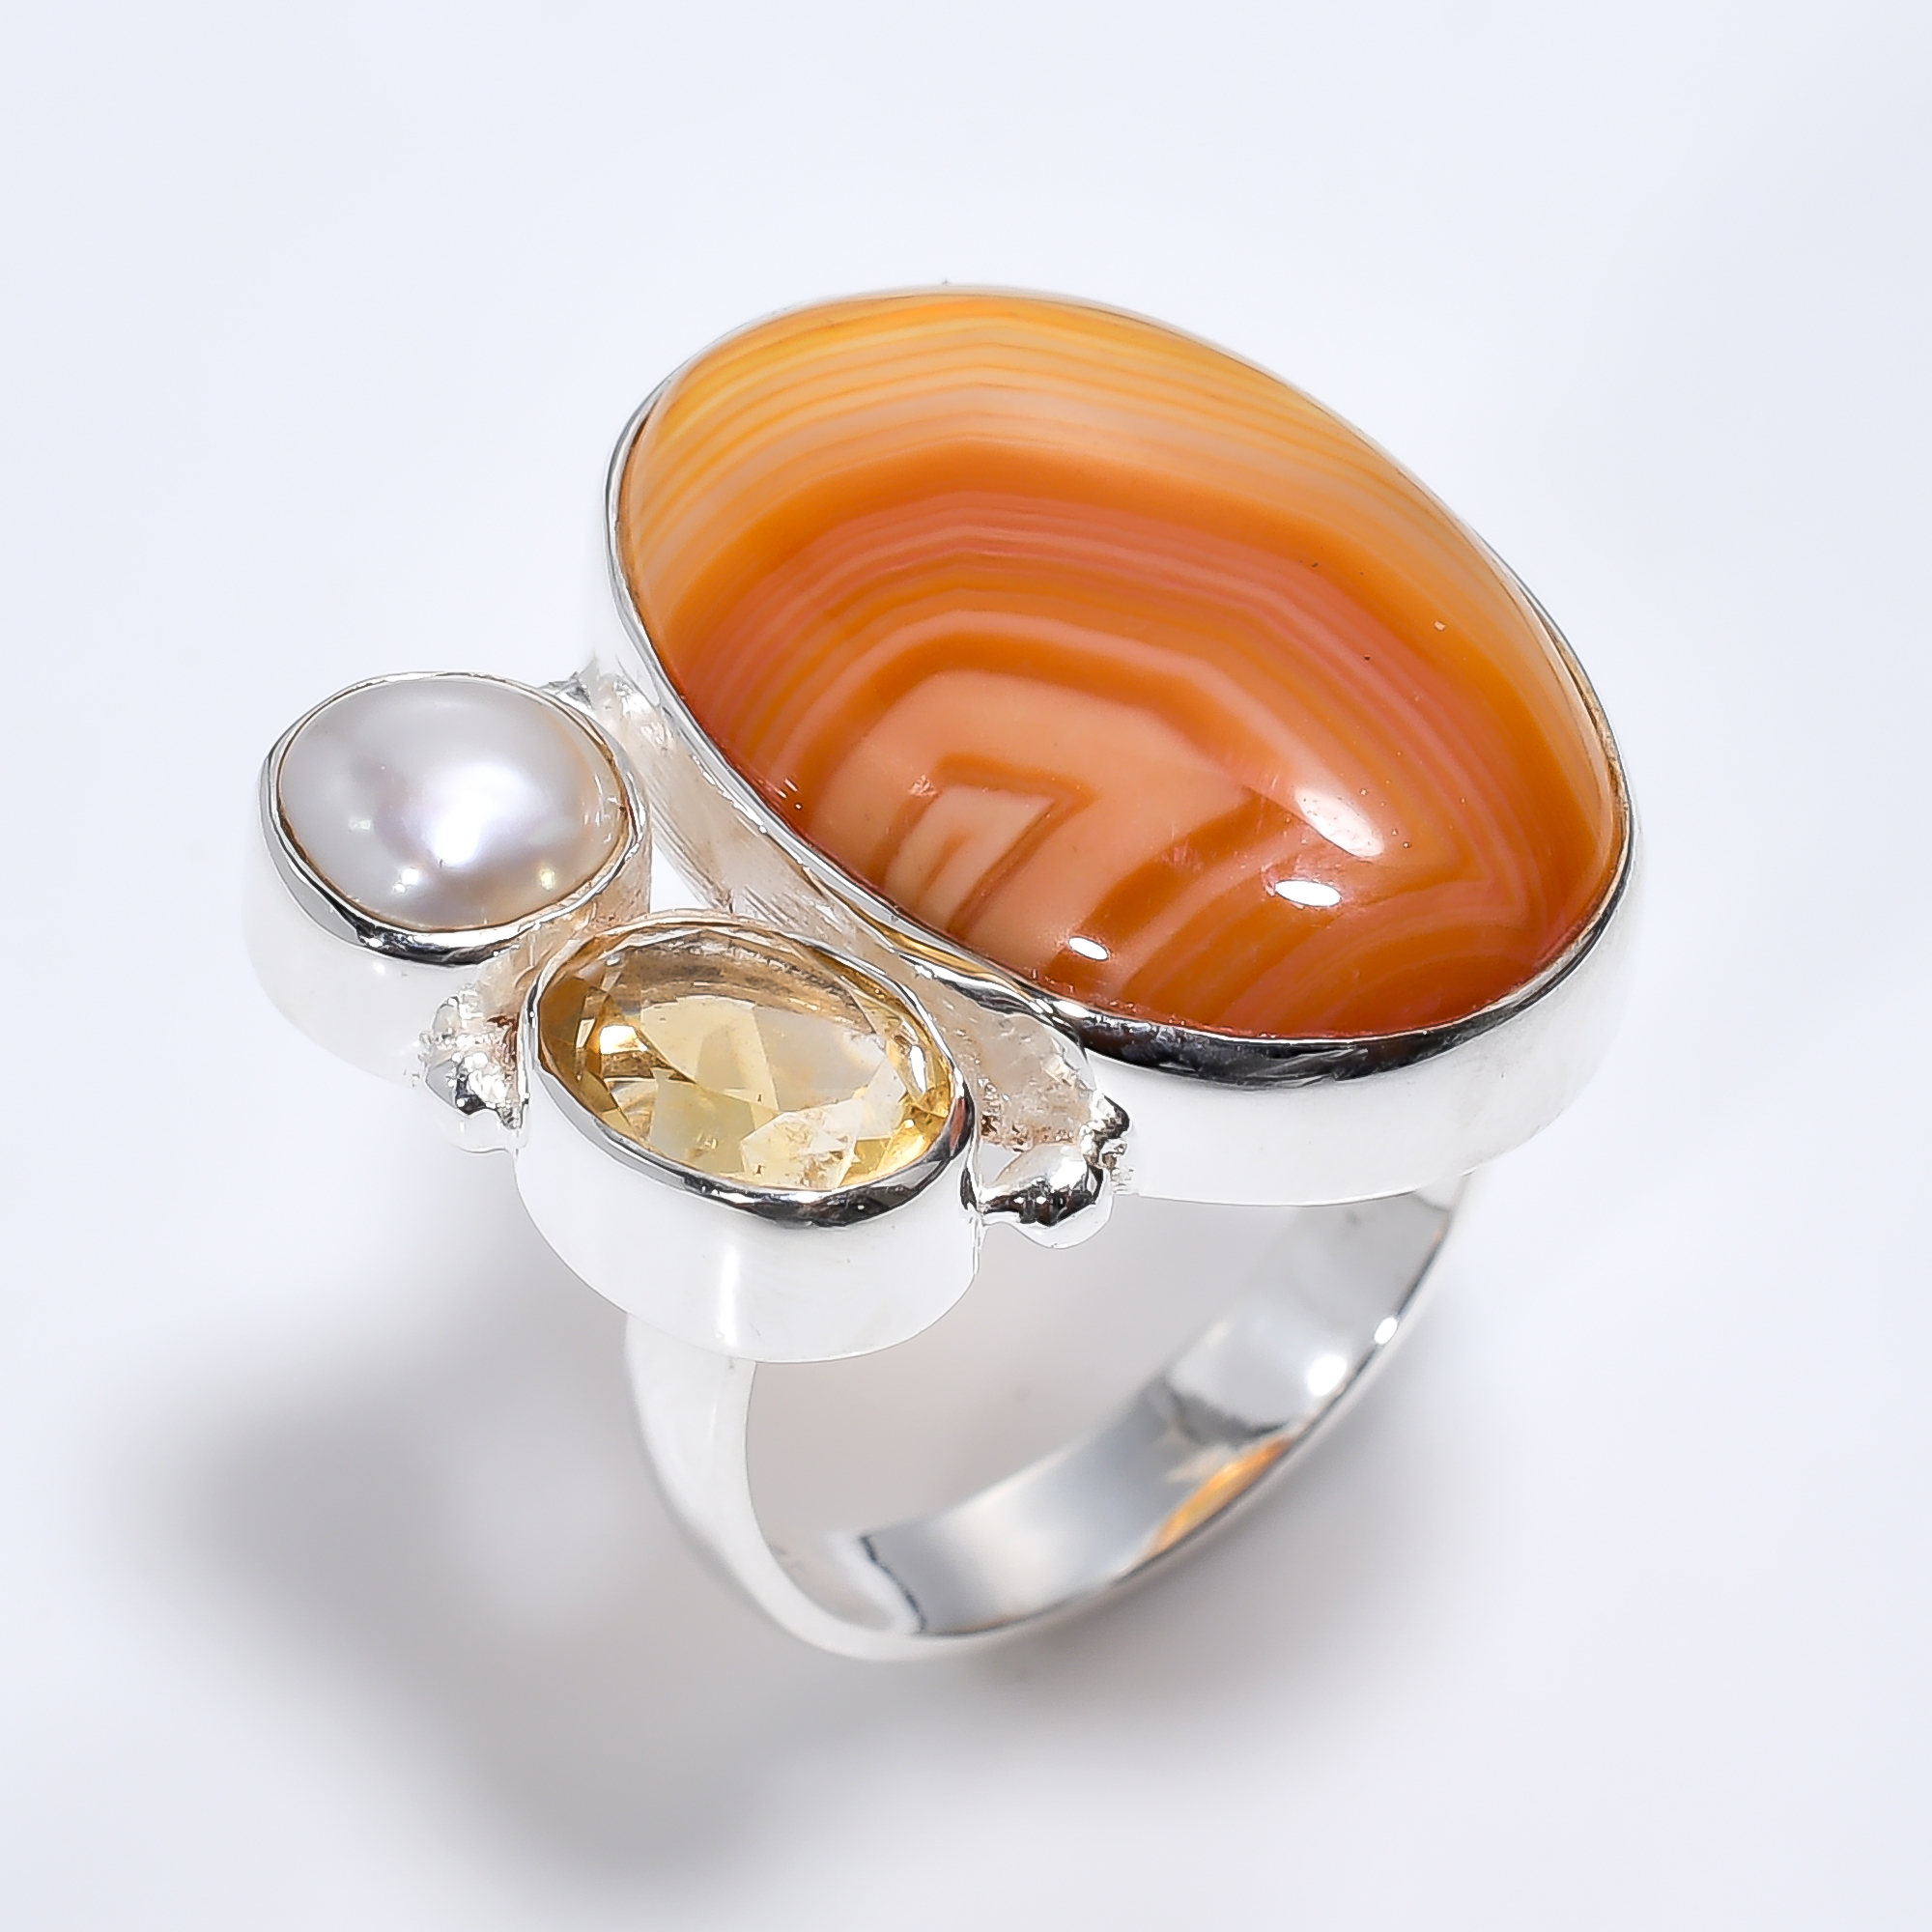 Natural Crazy Lace Agate Citrine Gemstone 925 Sterling Silver Ring Size US 7 Women Fashion Rings Suppier